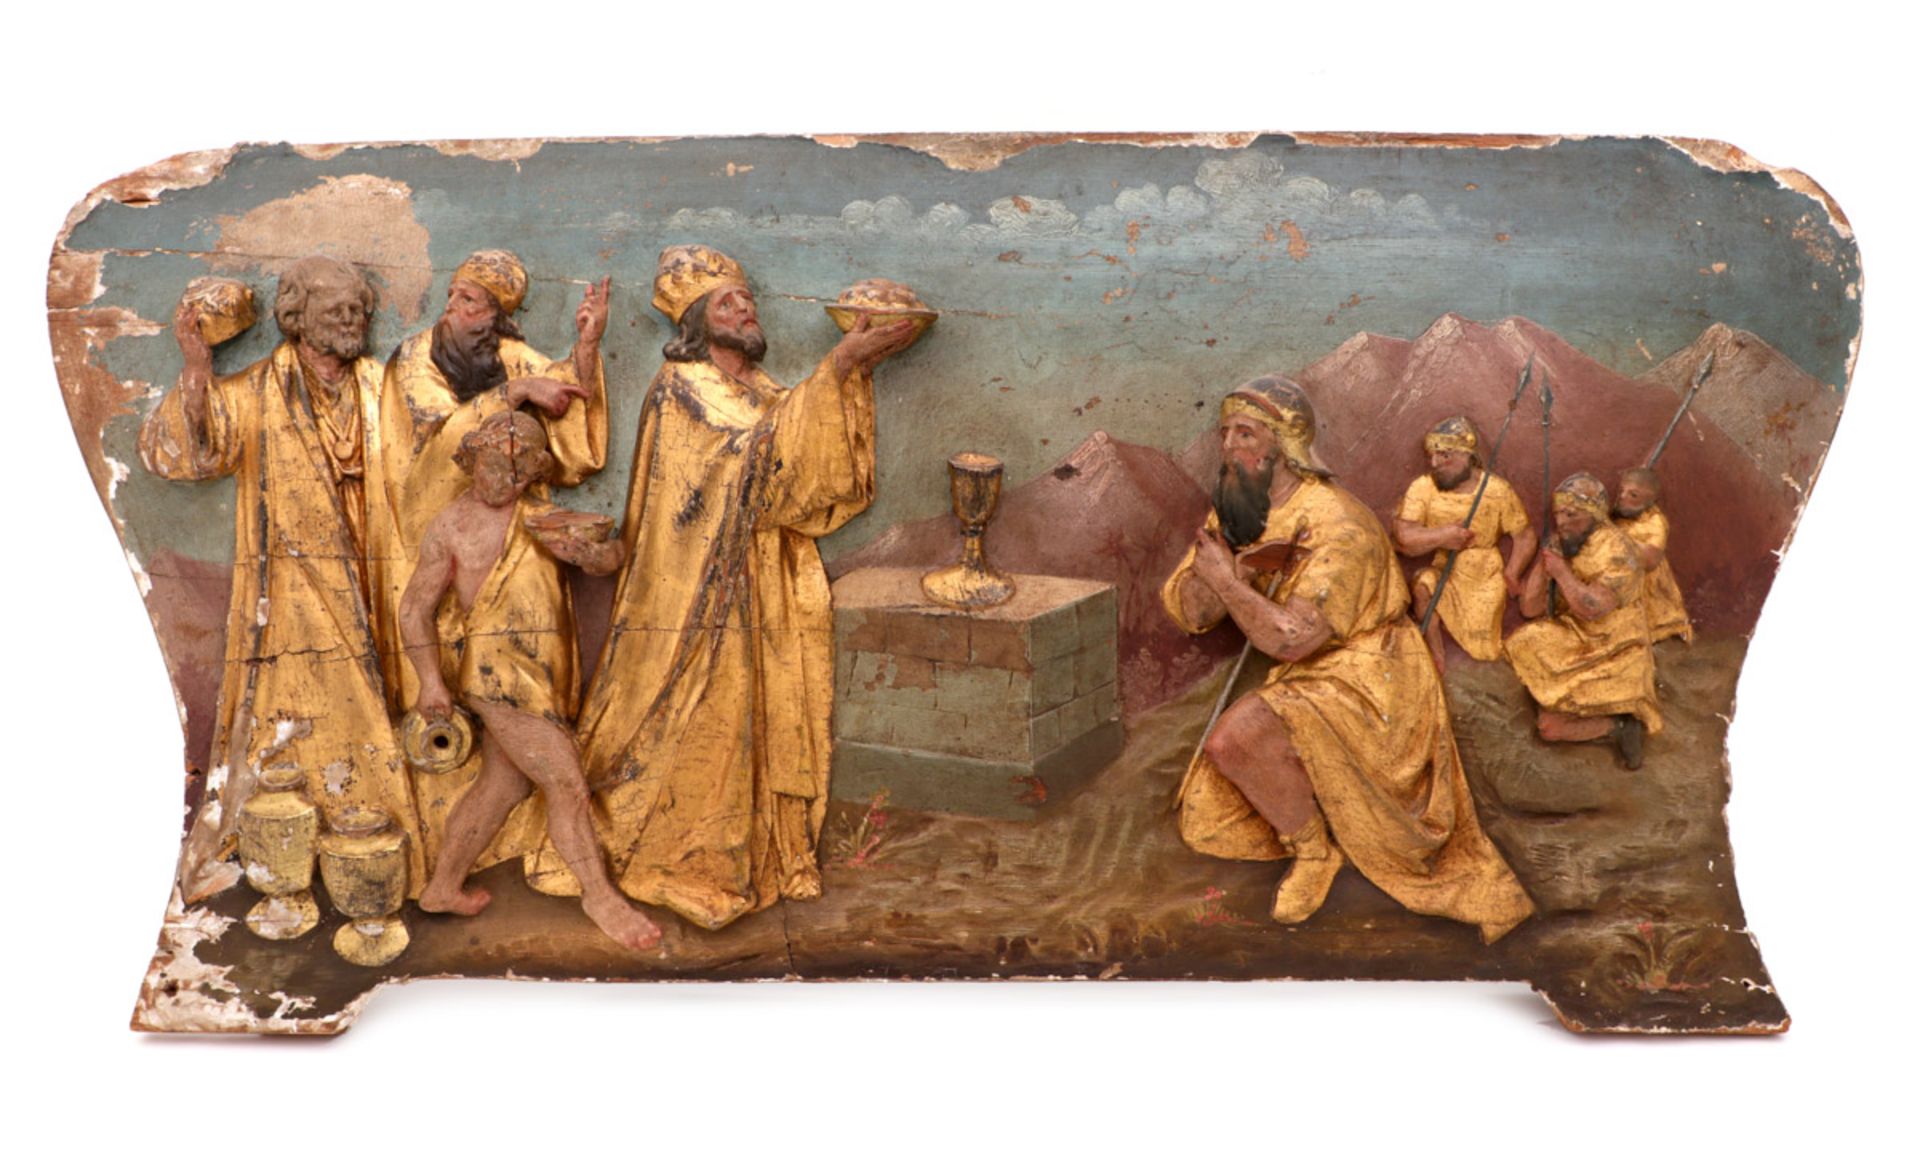 BIBLICAL SCENE Wood plaque in relief, polychrome and gilt decoration. Losses and defects. Dim.: 30.